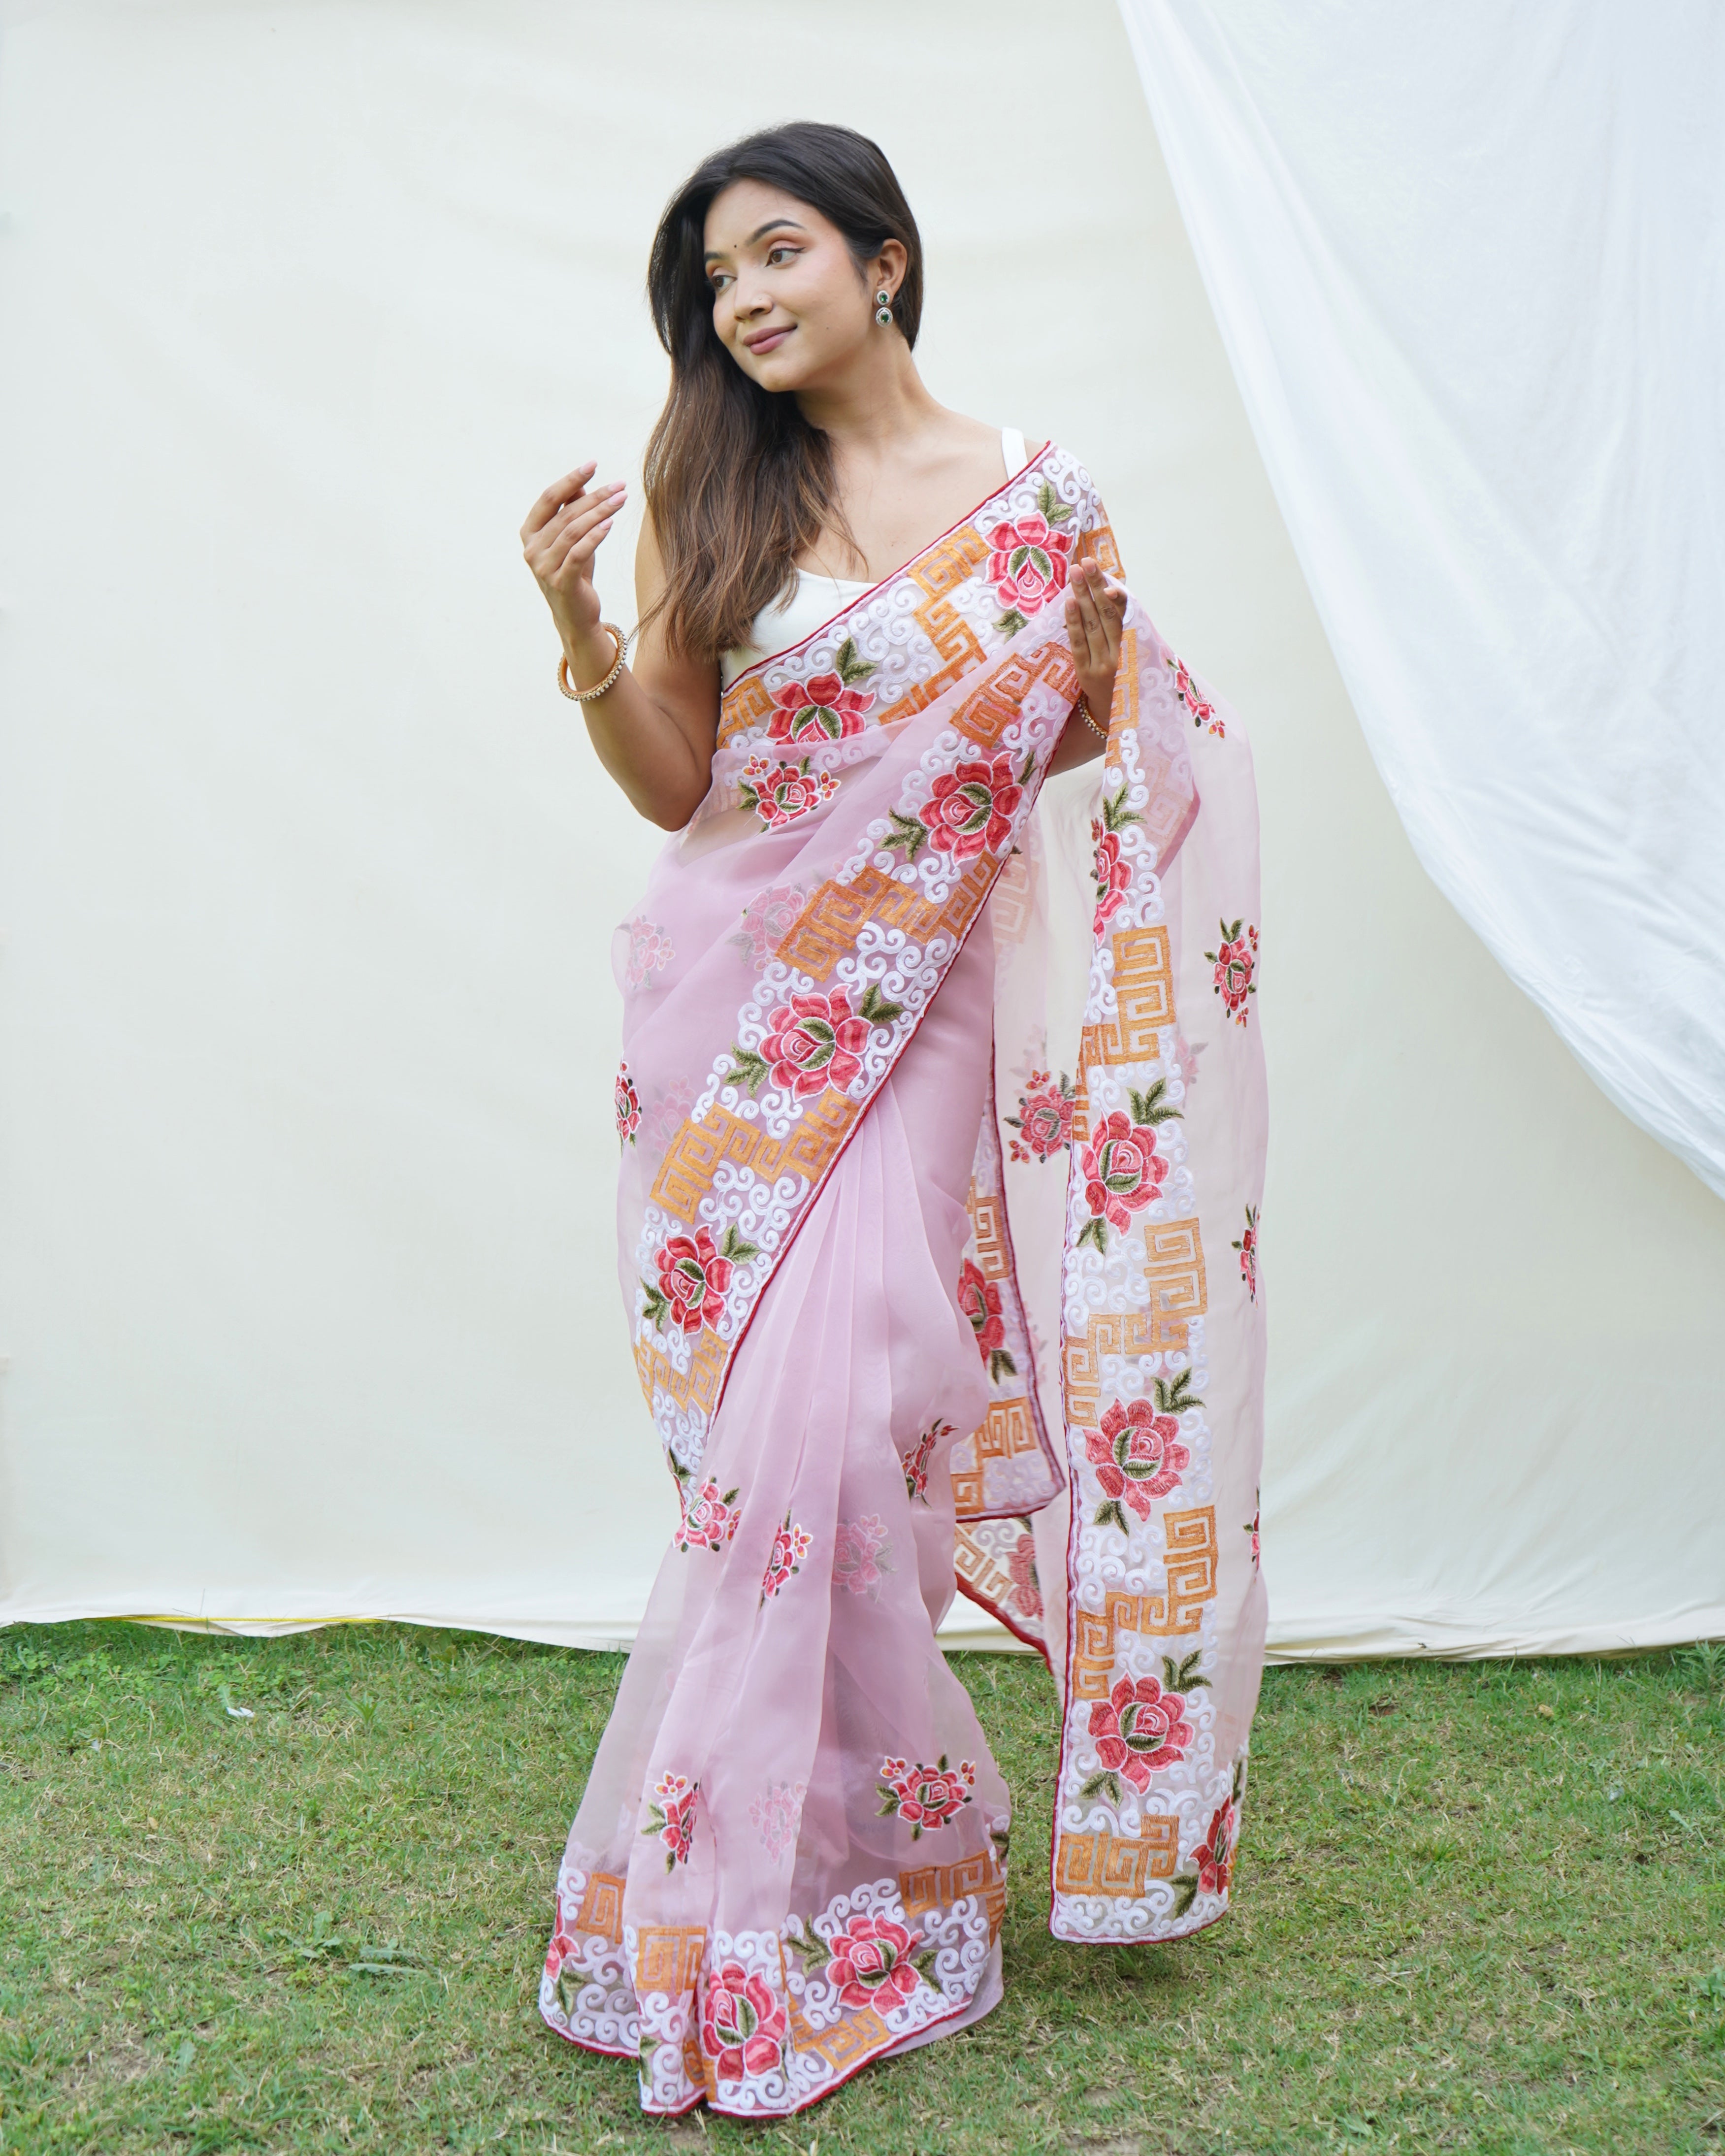 Best saree looks of Dilsha | Times of India